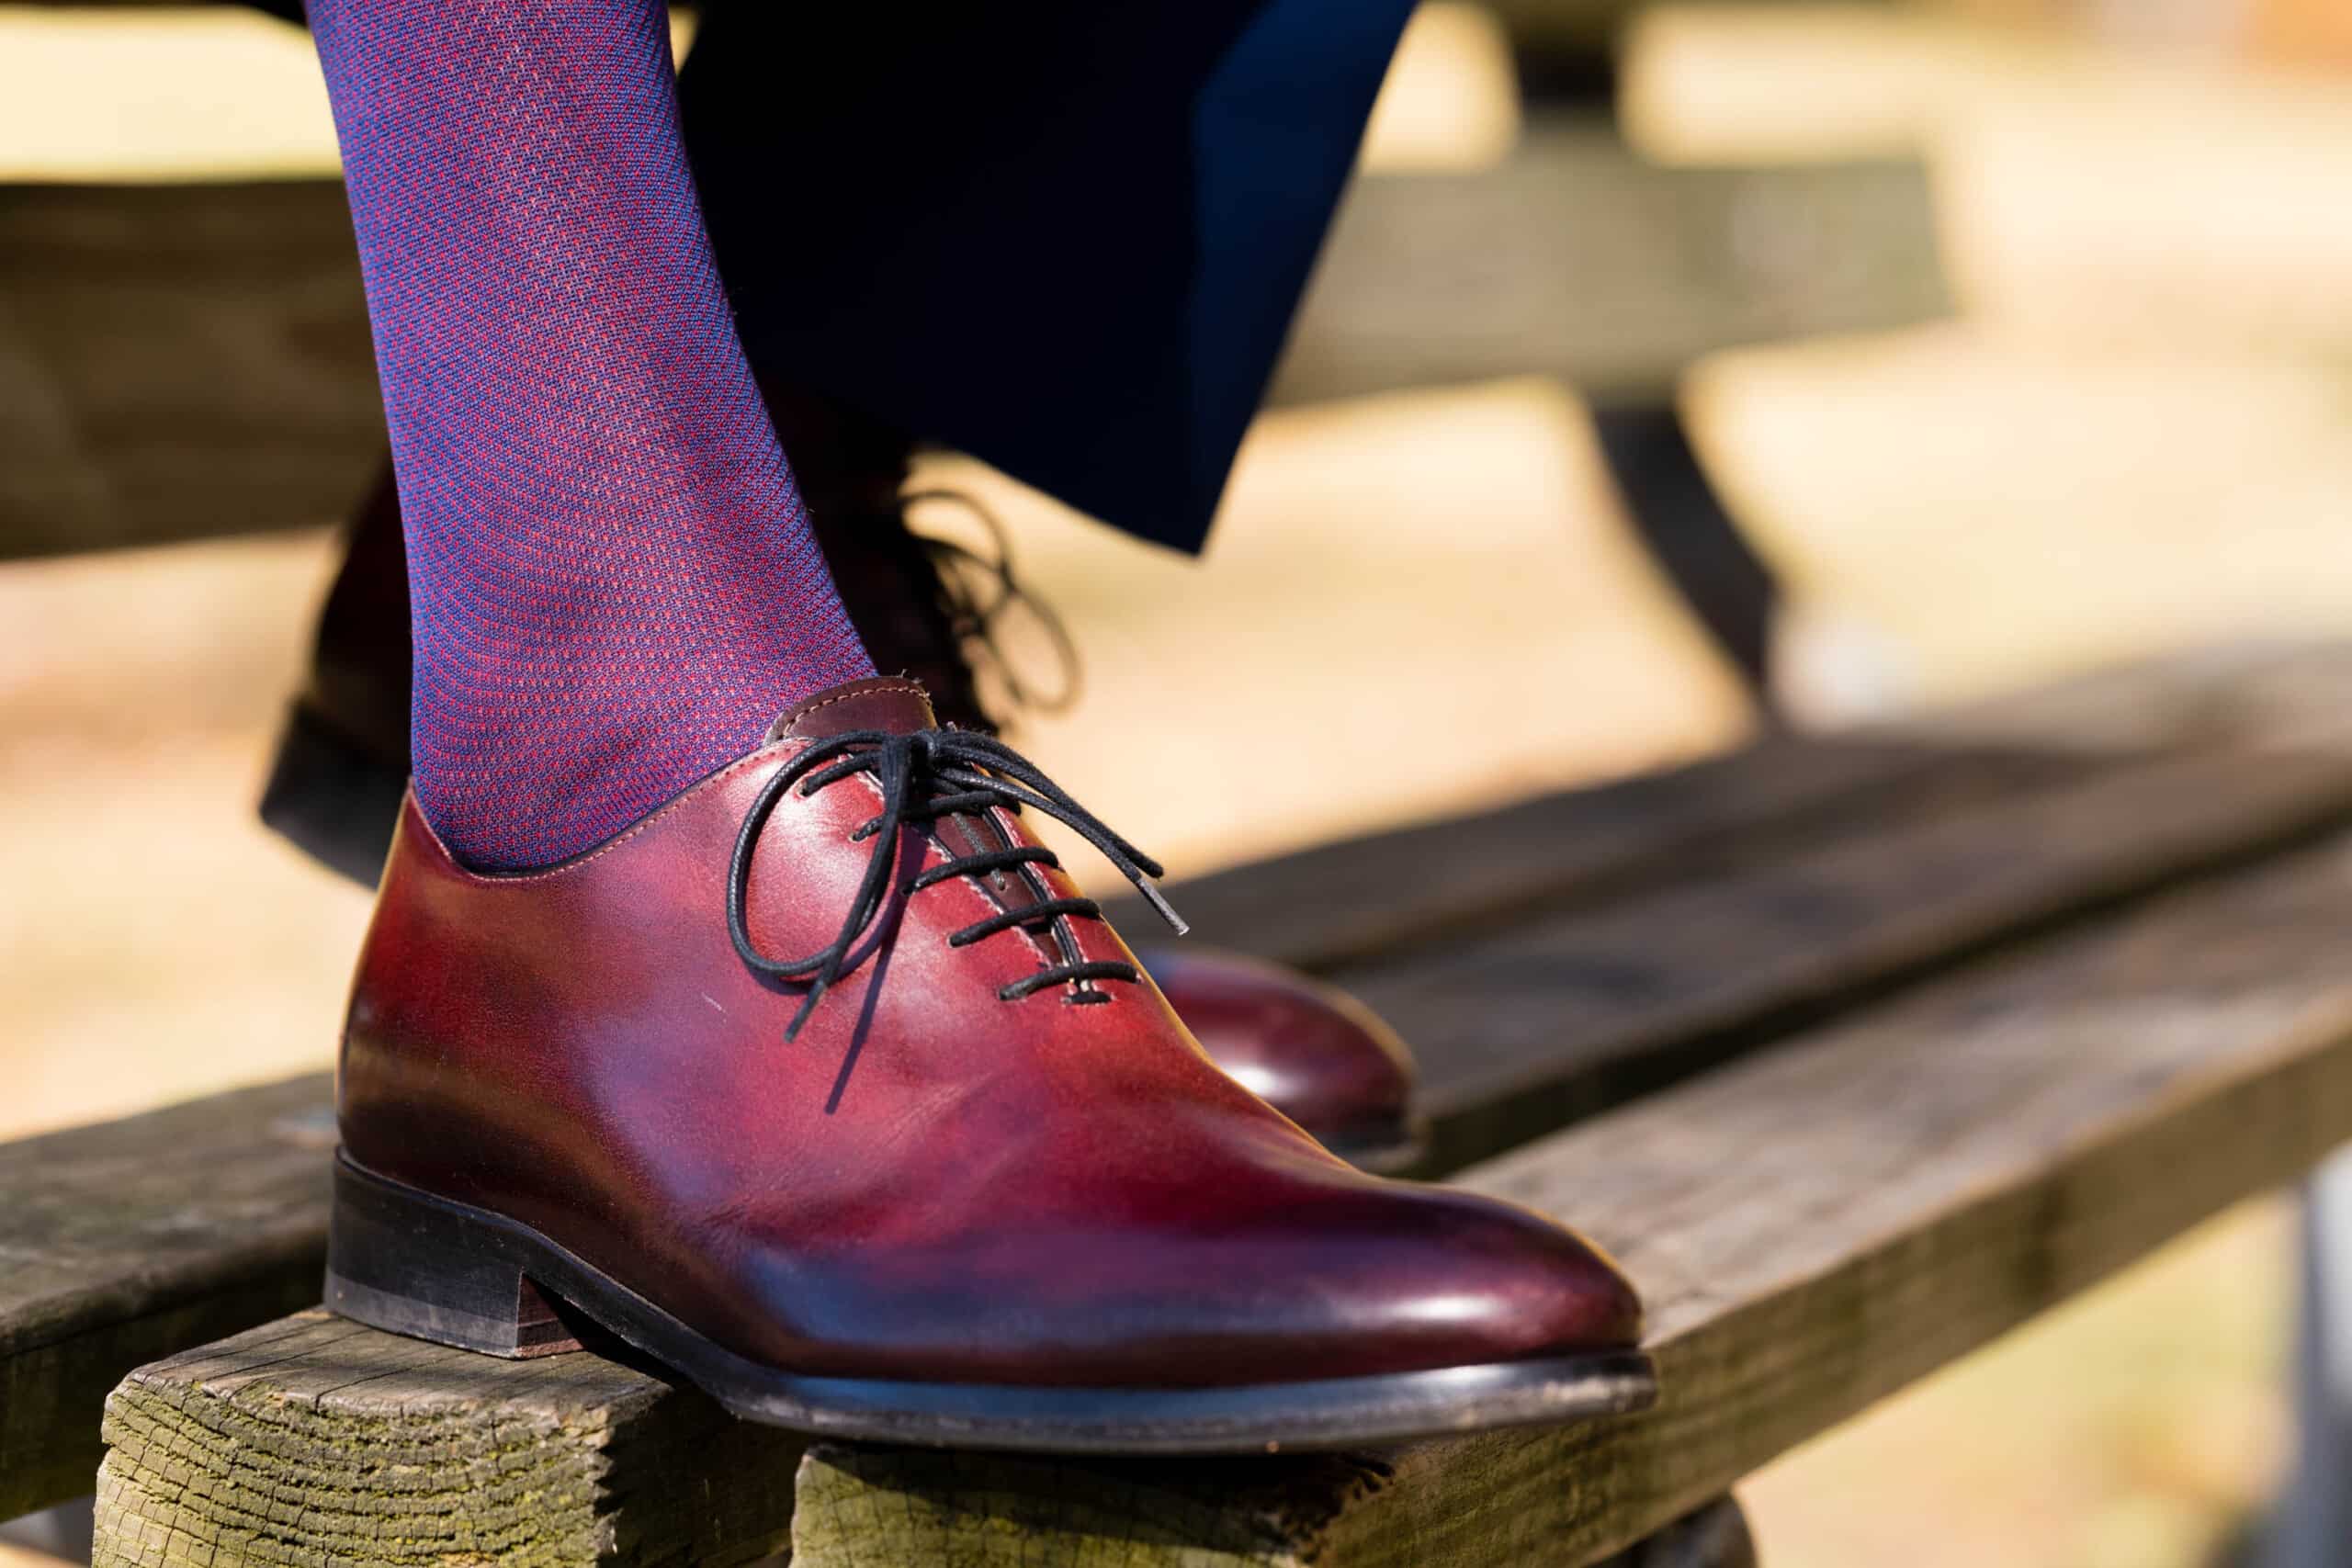 A photo of oxblood shoes with blue and red socks